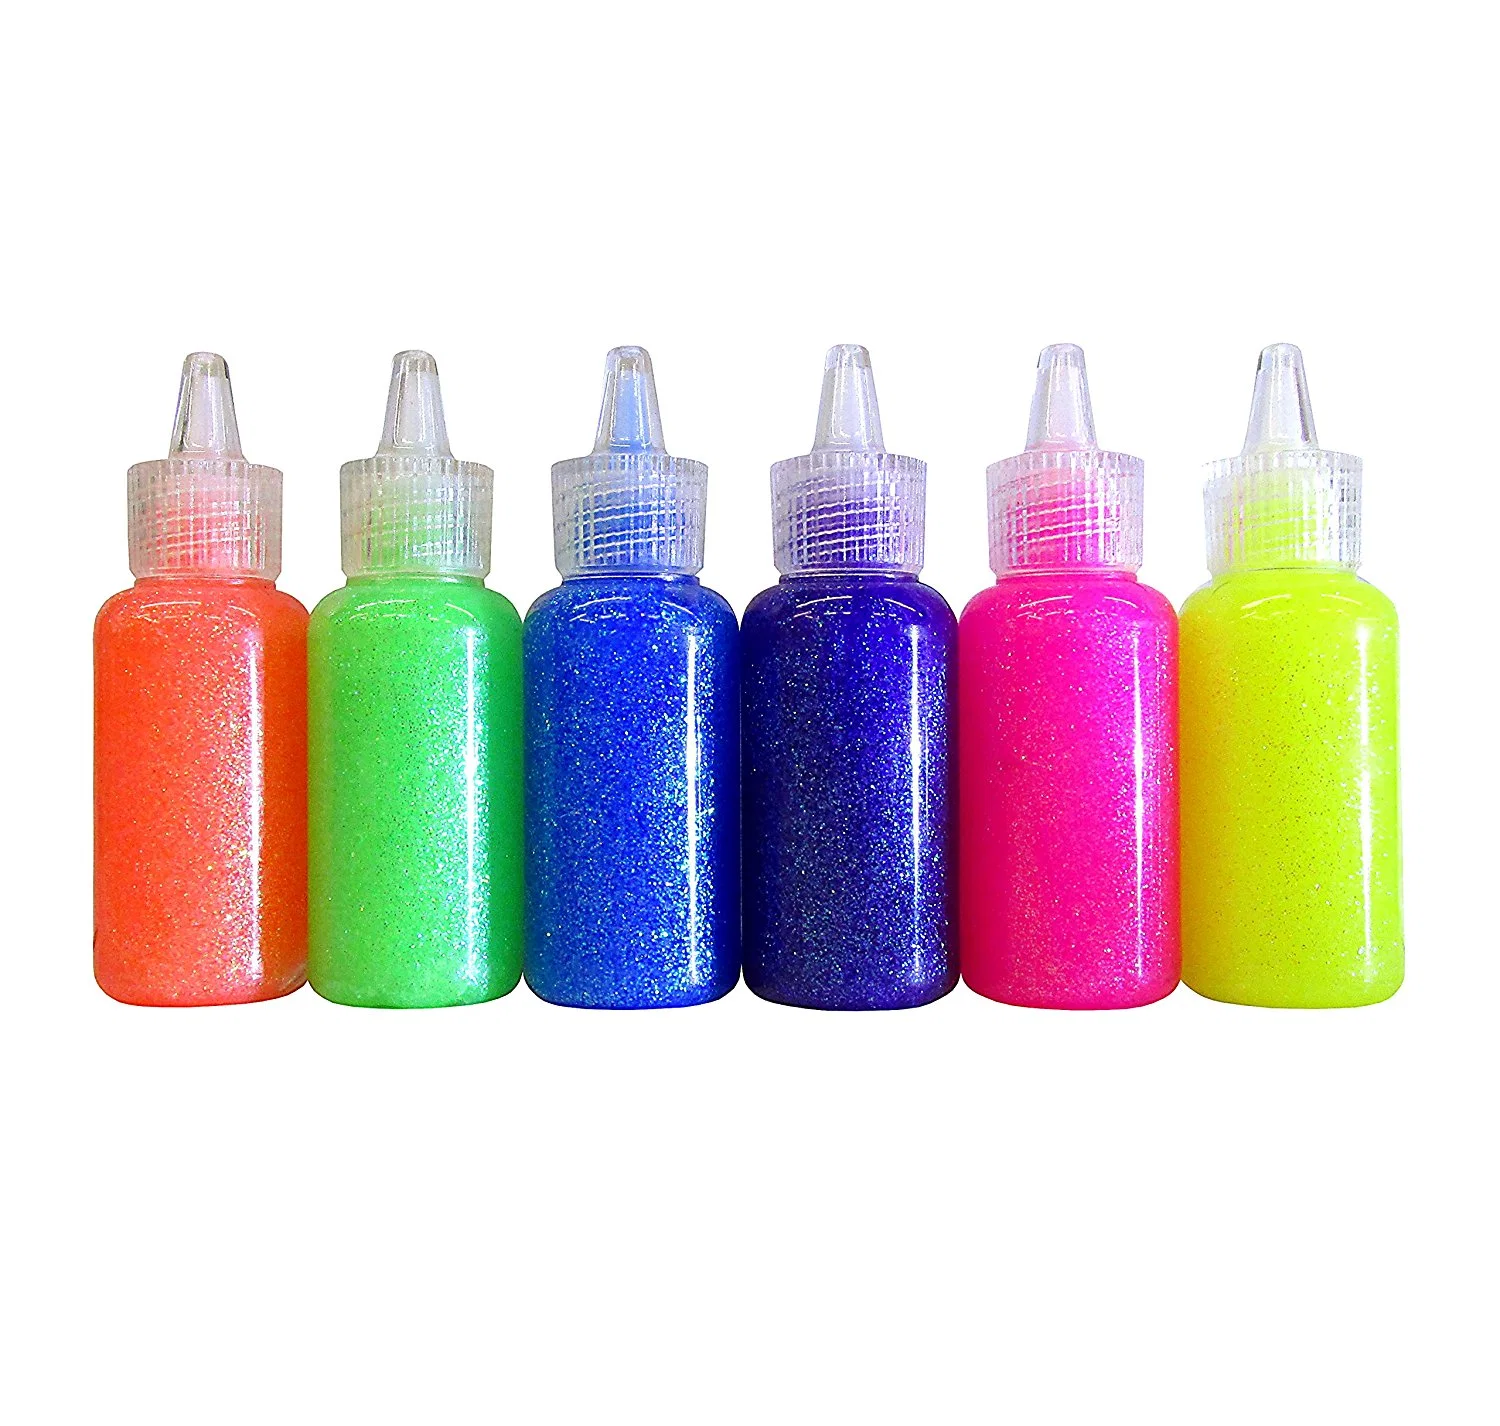 Mini Washable Glitter Glue, Art Tools, Great for Arts and Crafts